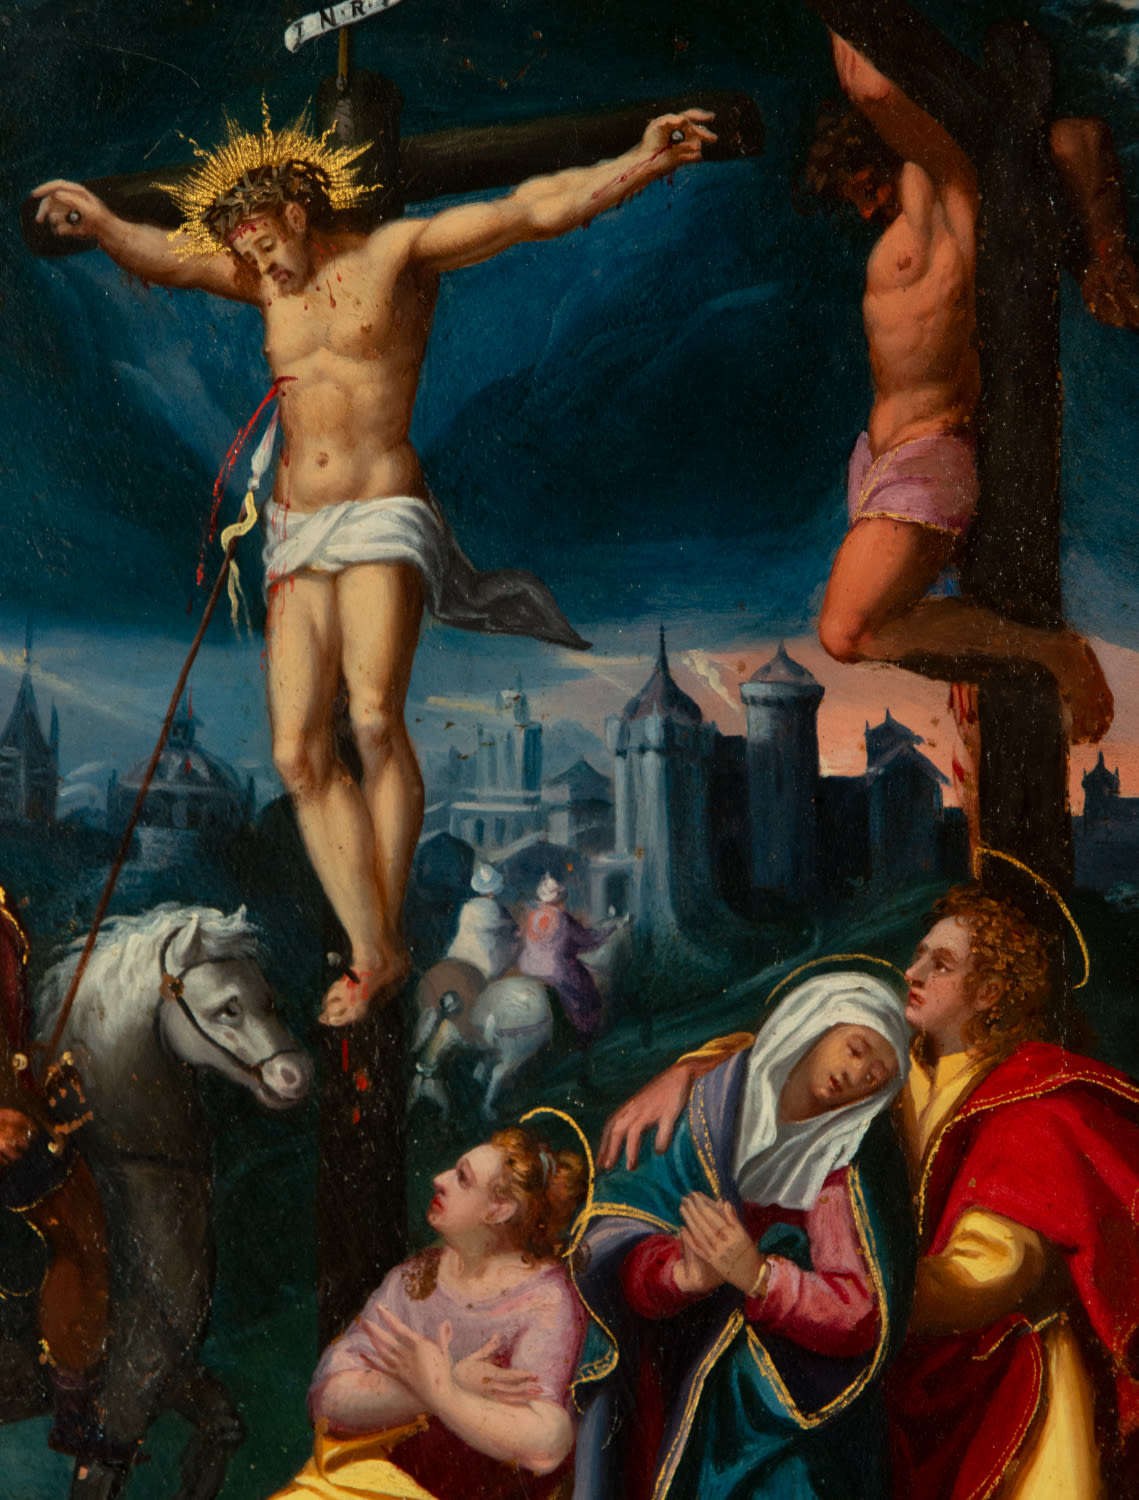 Attributed to Simon de Vos (Antwerp, 1603 – 1676) Christ on the Cross, oil on copper from the 17th c - Image 5 of 6